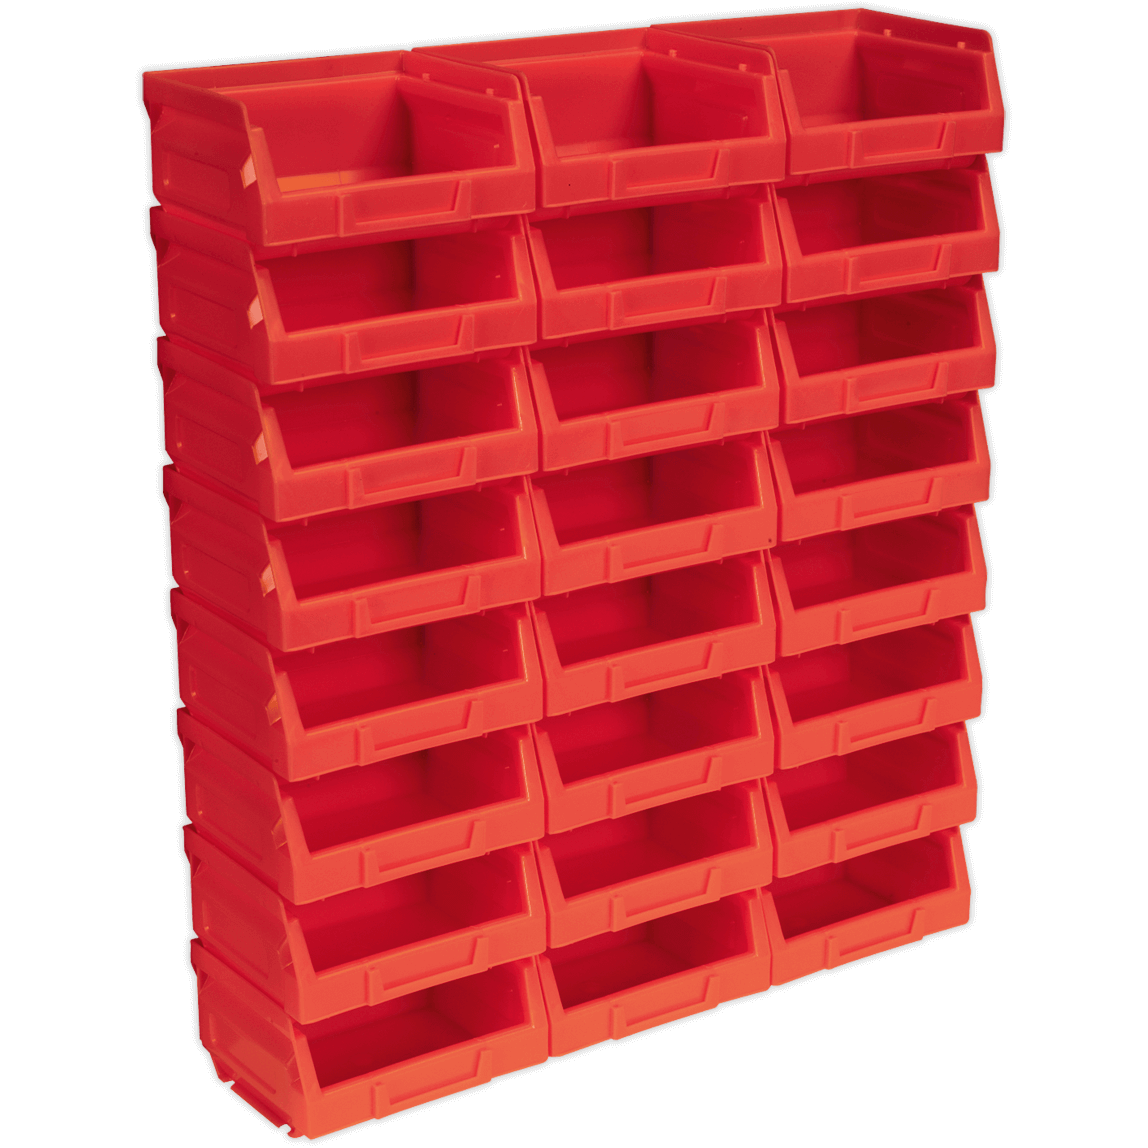 Image of Sealey Plastic Storage Bin 103 x 85 x 53mm RED Pack of 24